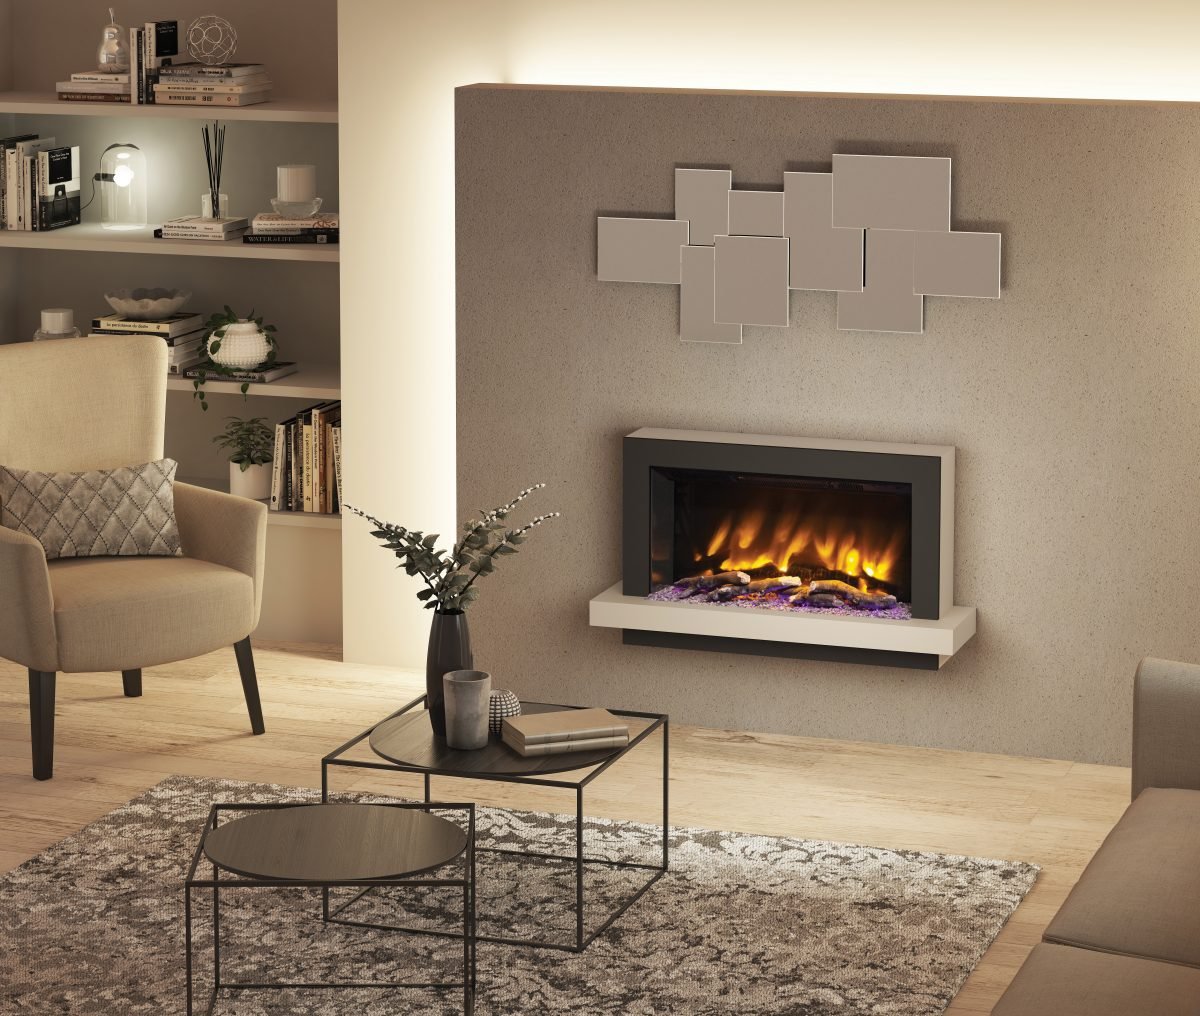 Elgin & Hall Pryzm 5D Electric Fire Huxton 41″ Wall Mounted Timber Suite in Cashmere & Anthracite